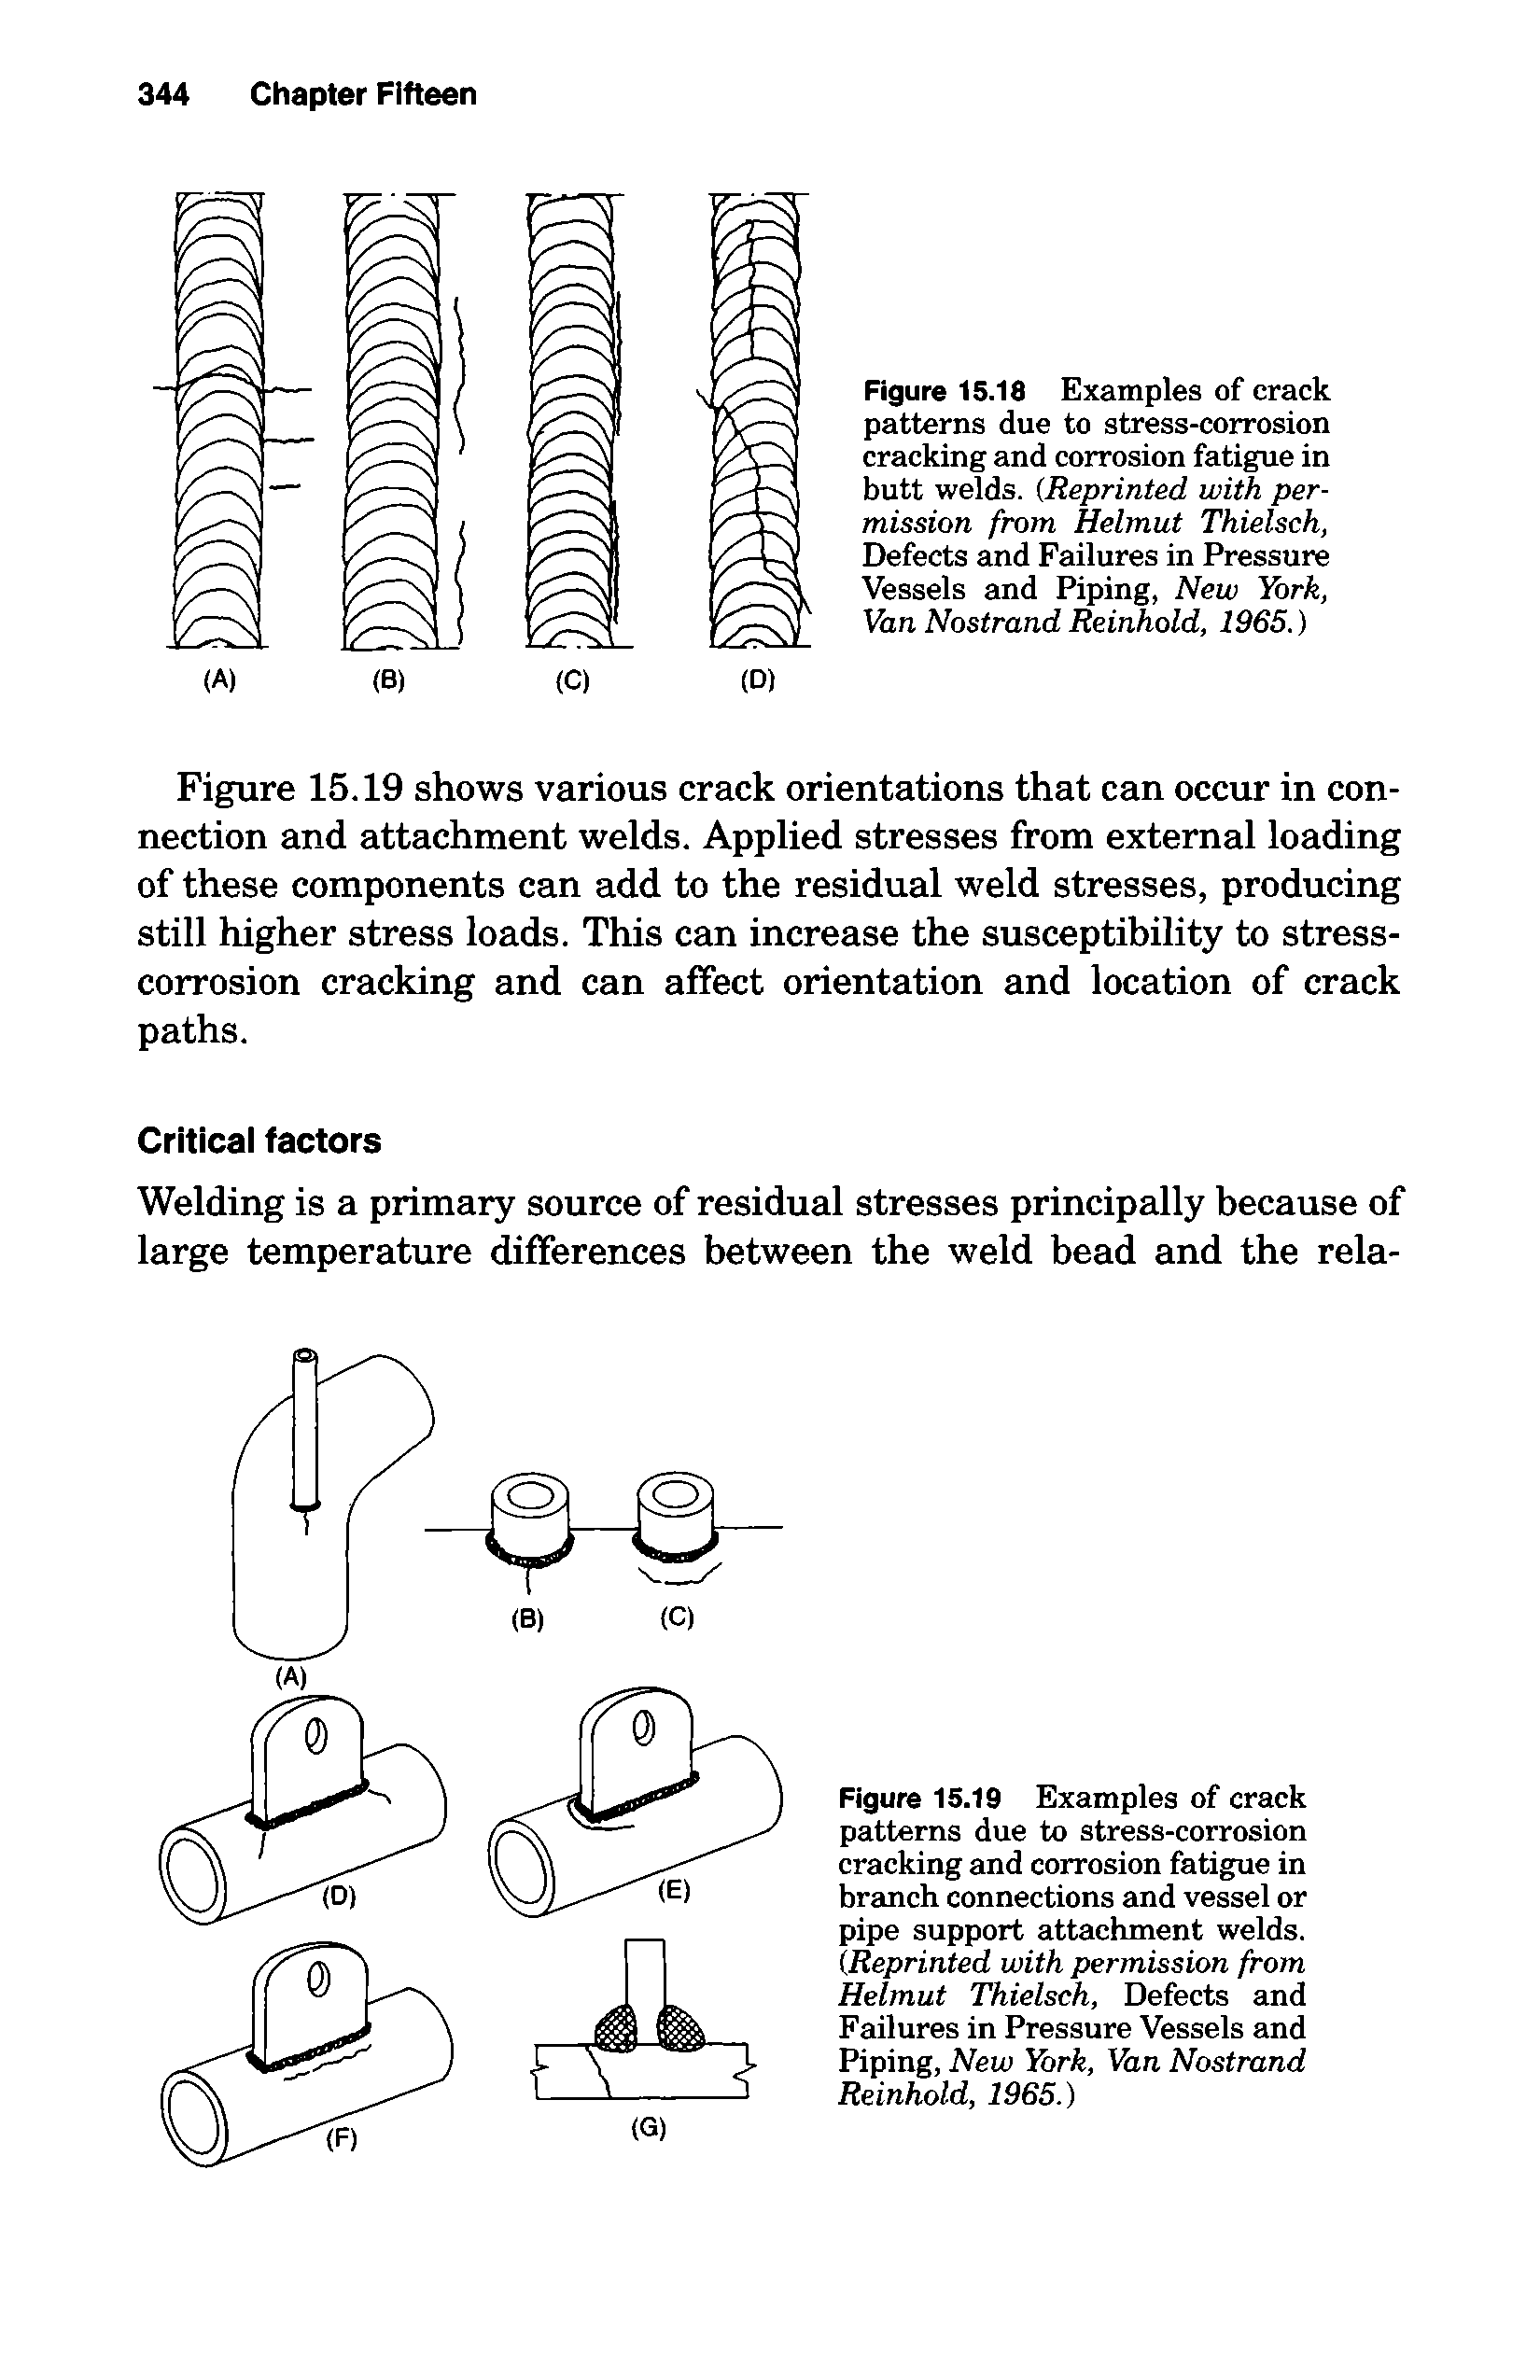 Figure 15.19 Examples of crack patterns due to stress-corrosion cracking and corrosion fatigue in branch connections and vessel or pipe support attachment welds. (Reprinted with permission from Helmut Thielsch, Defects and Failures in Pressure Vessels and Piping, New York, Van Nostrand Reinhold, 1965.)...